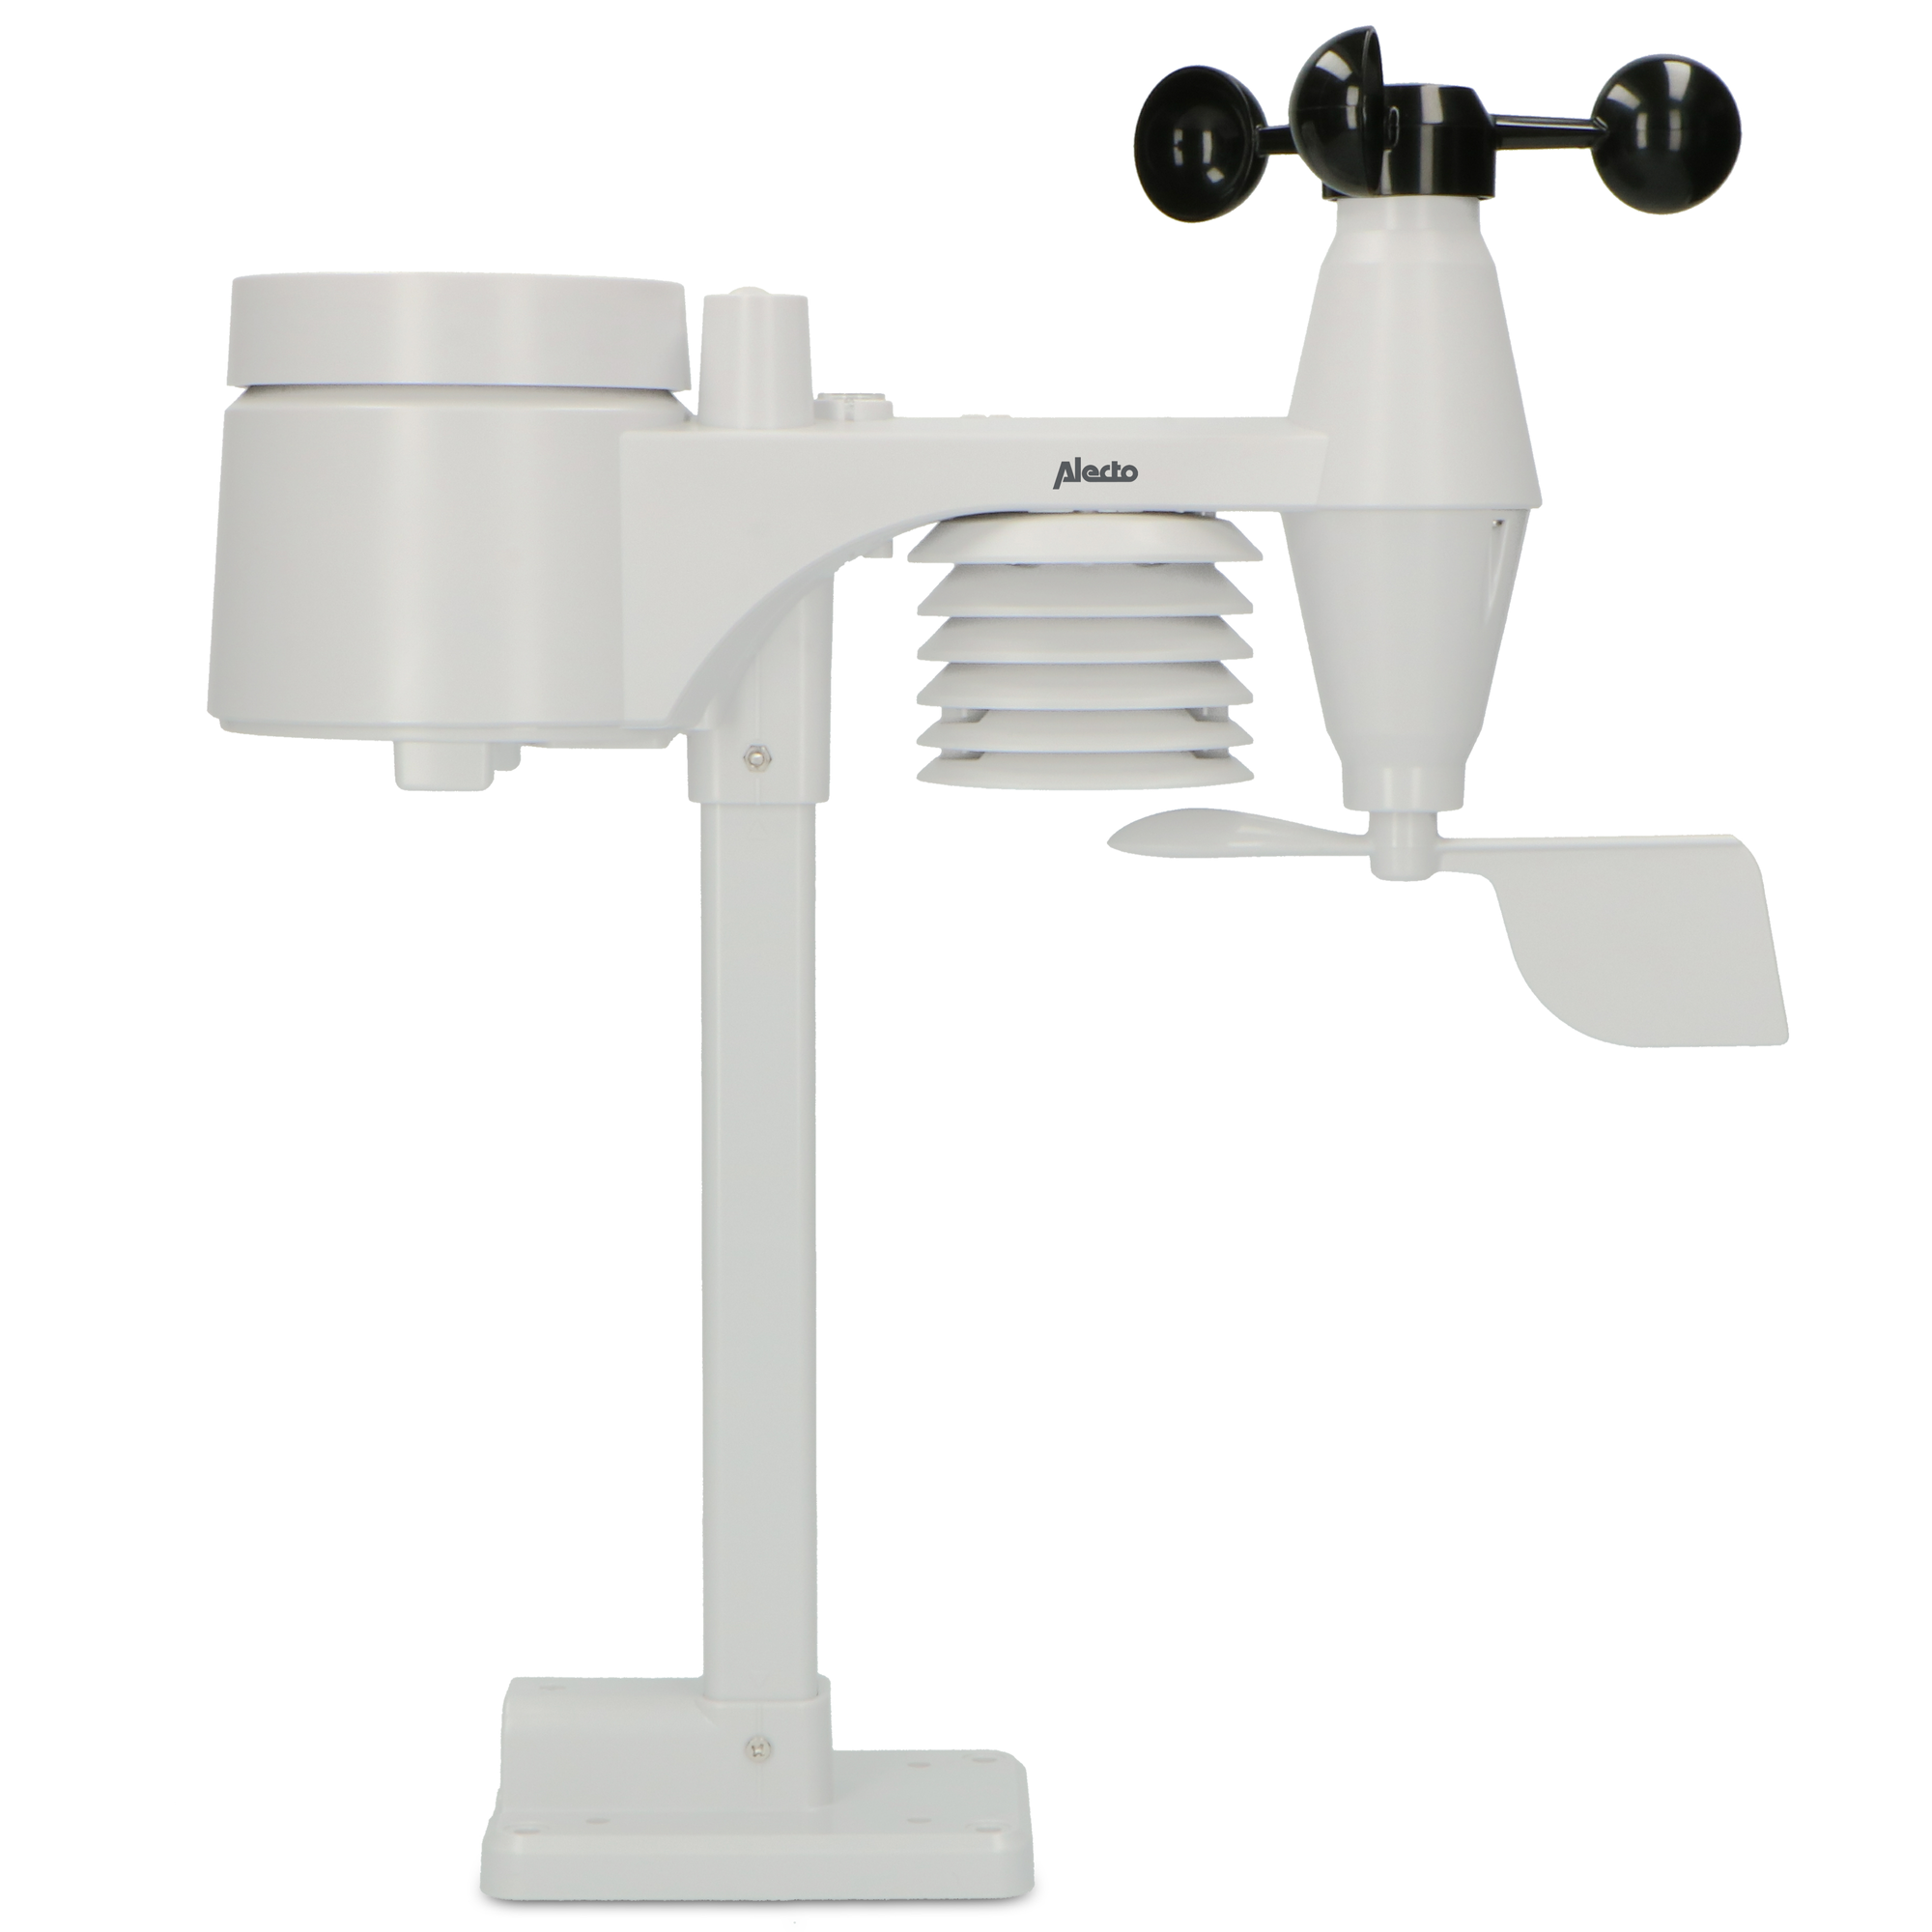 ALECTO WS5400 Wetterstation